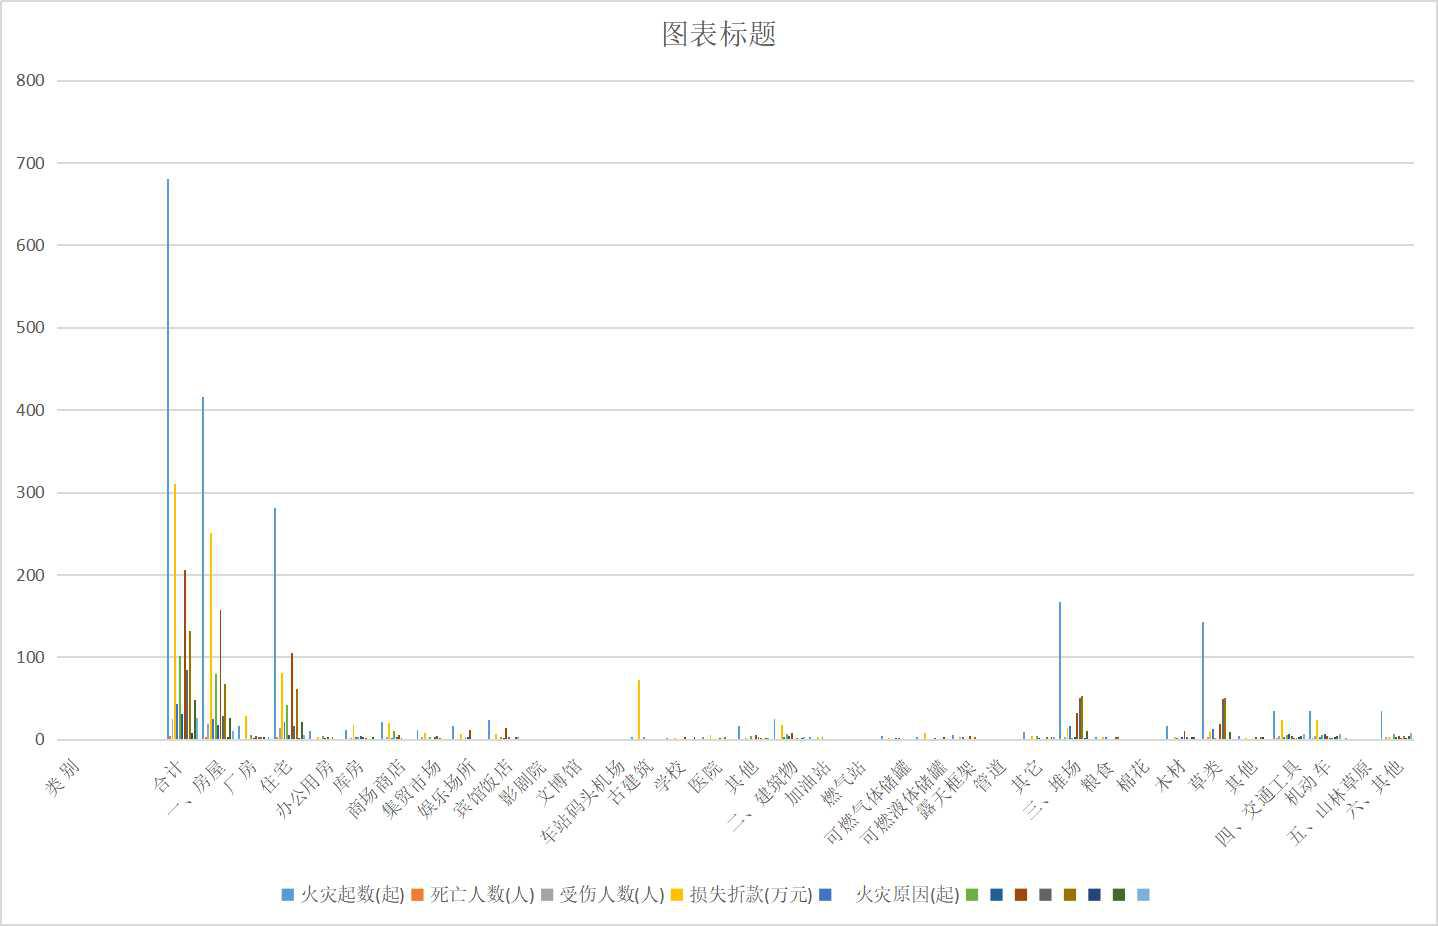 Statistics of fire accidents in Qinghai Province (1998-2010)